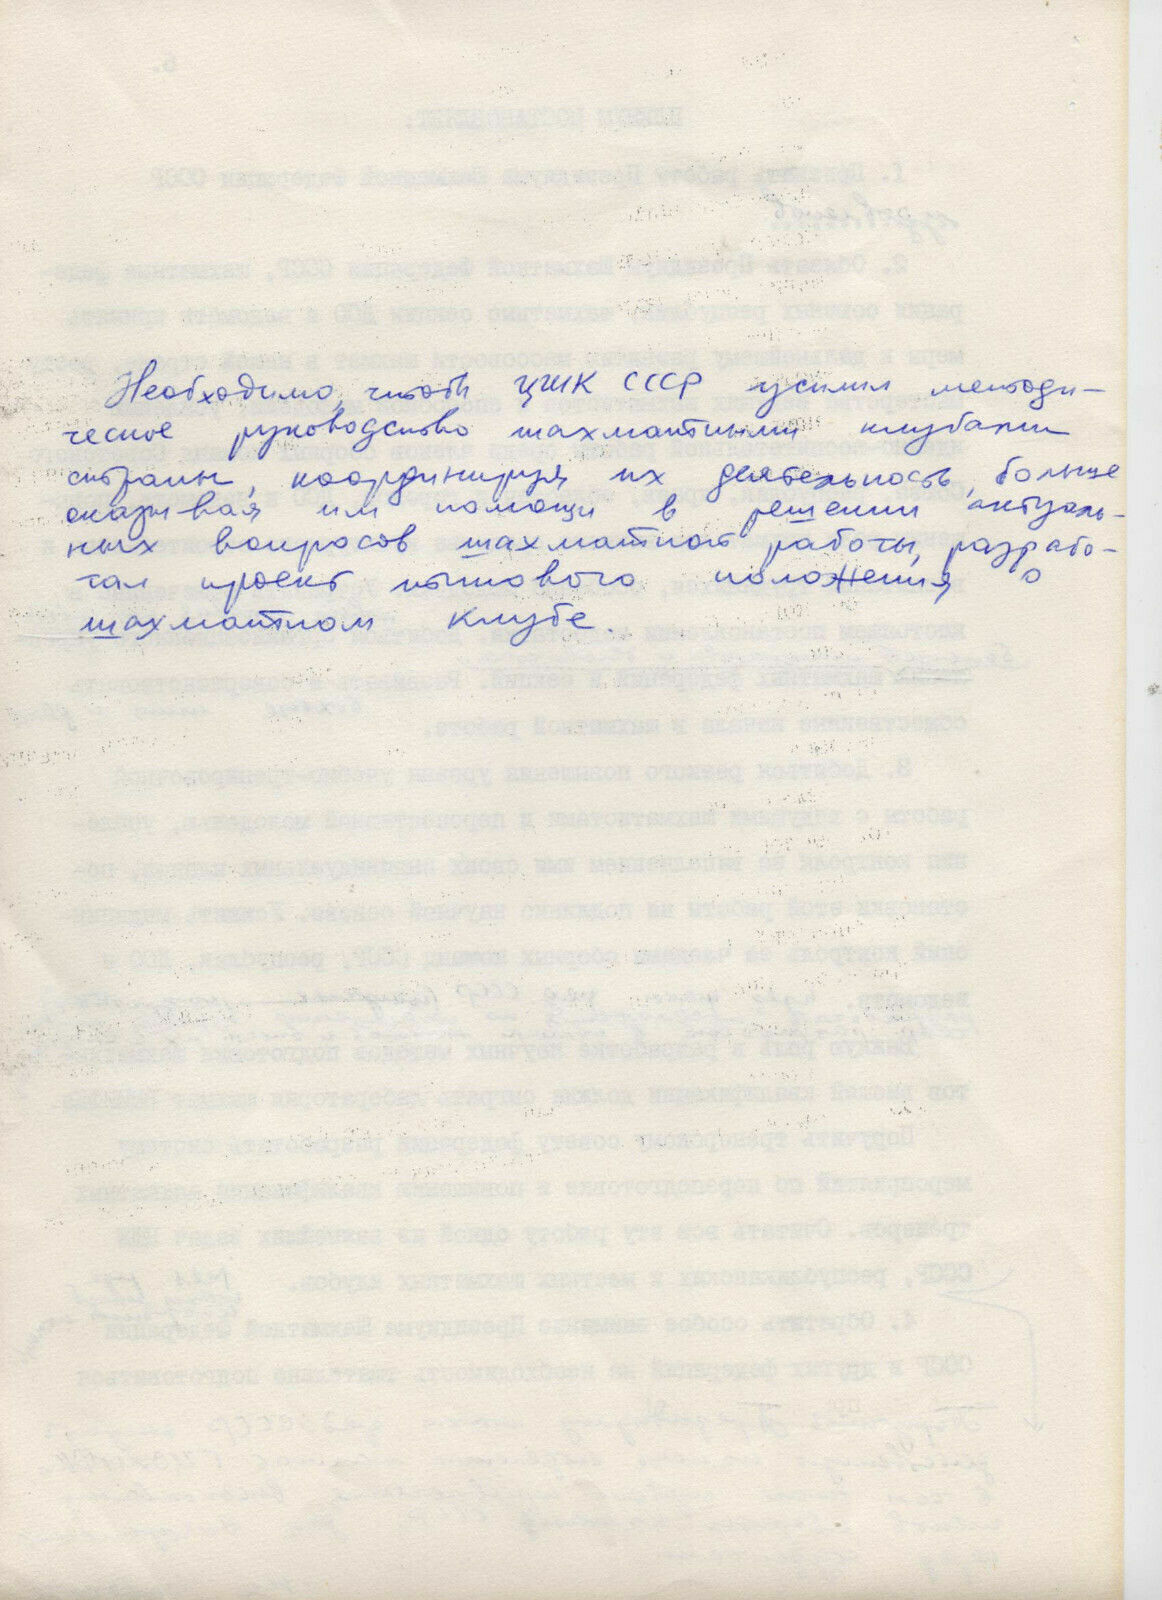 11589.Russian Chess: Resolution of Plenum of USSR Chess Federation. November 24, 1974